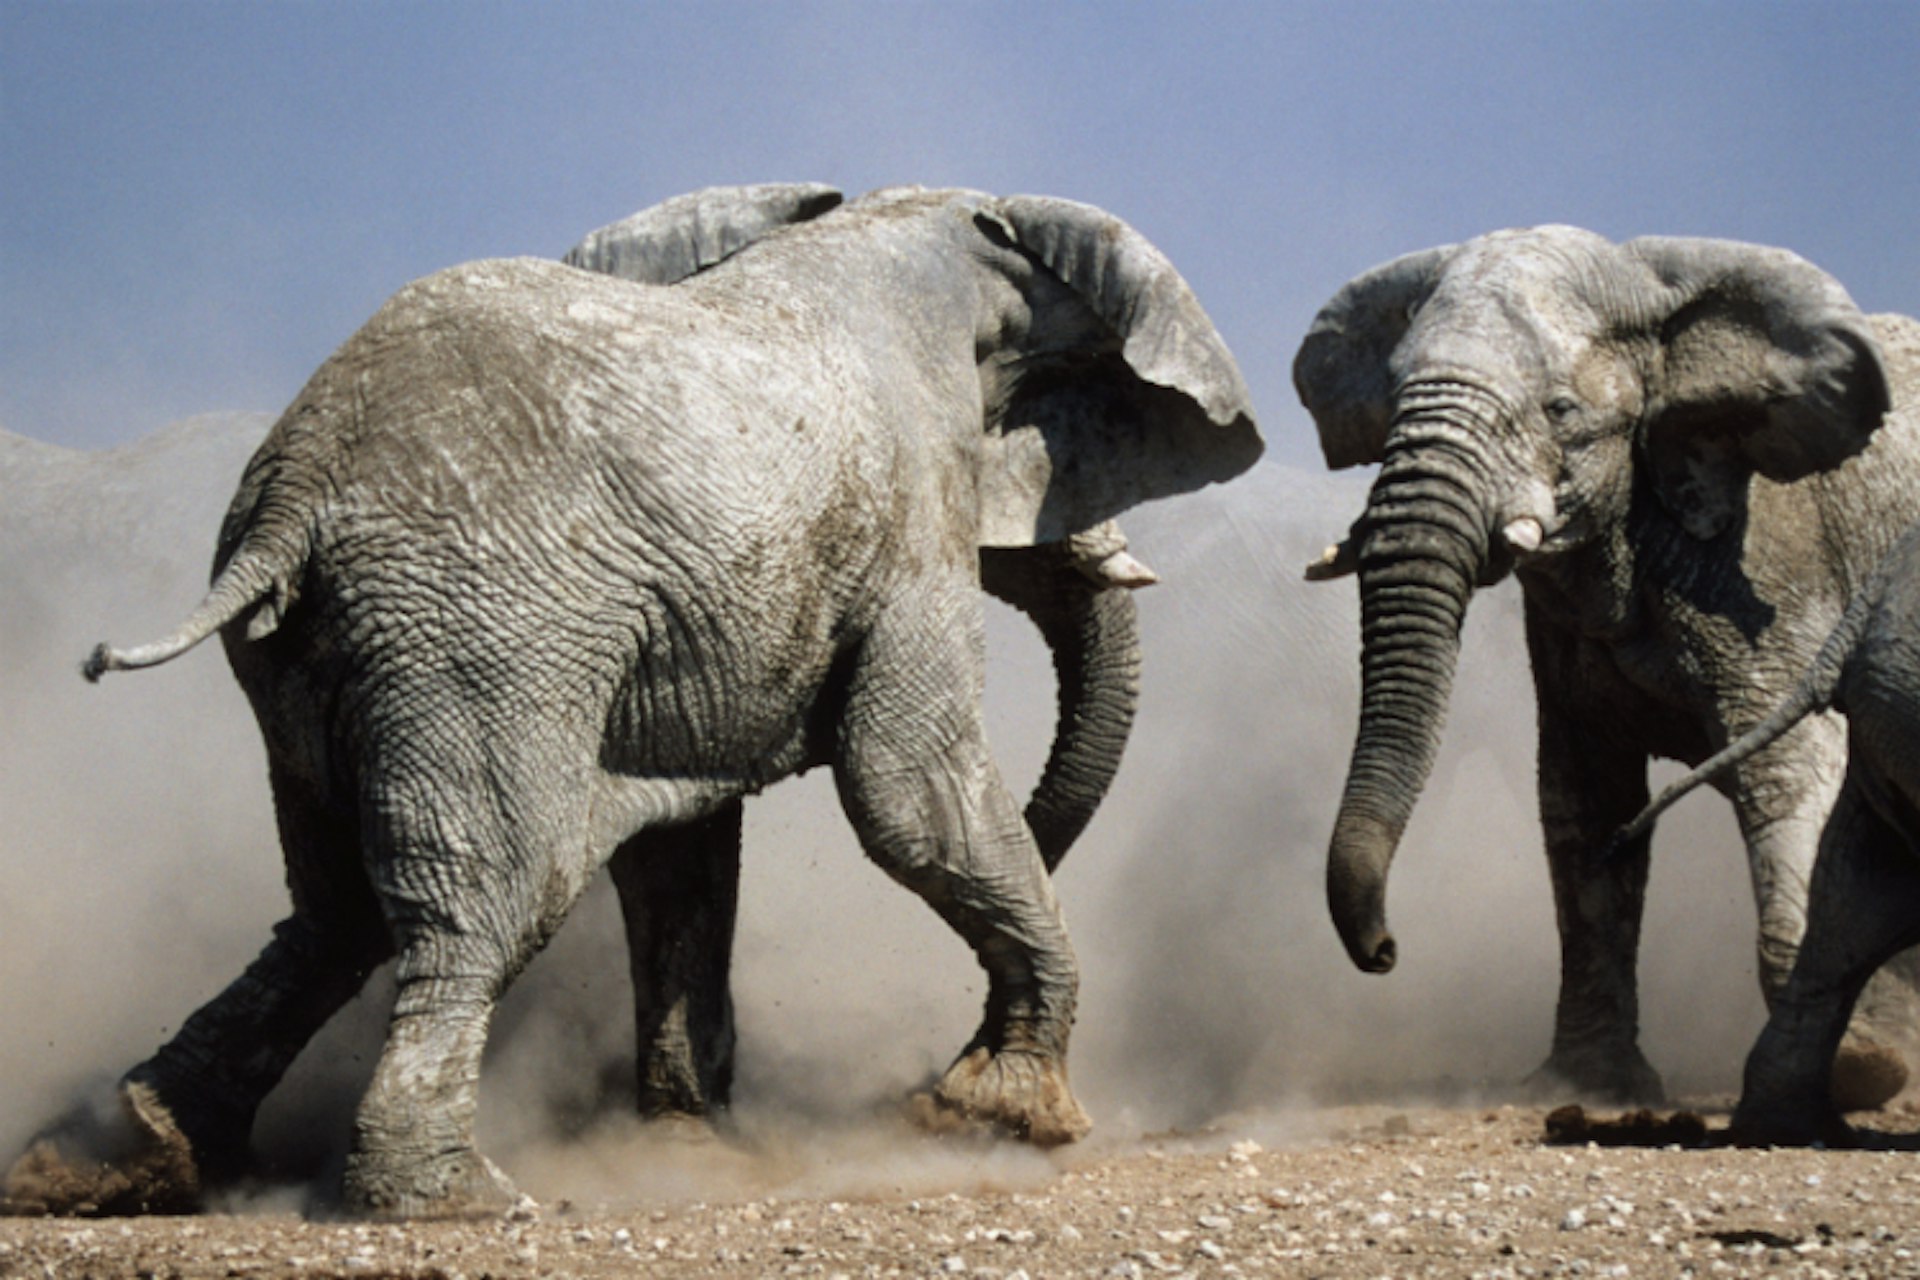 Two African bull elephants getting ready to rumble. Image by Lanz von Horsten / Gallo Images / Getty Images